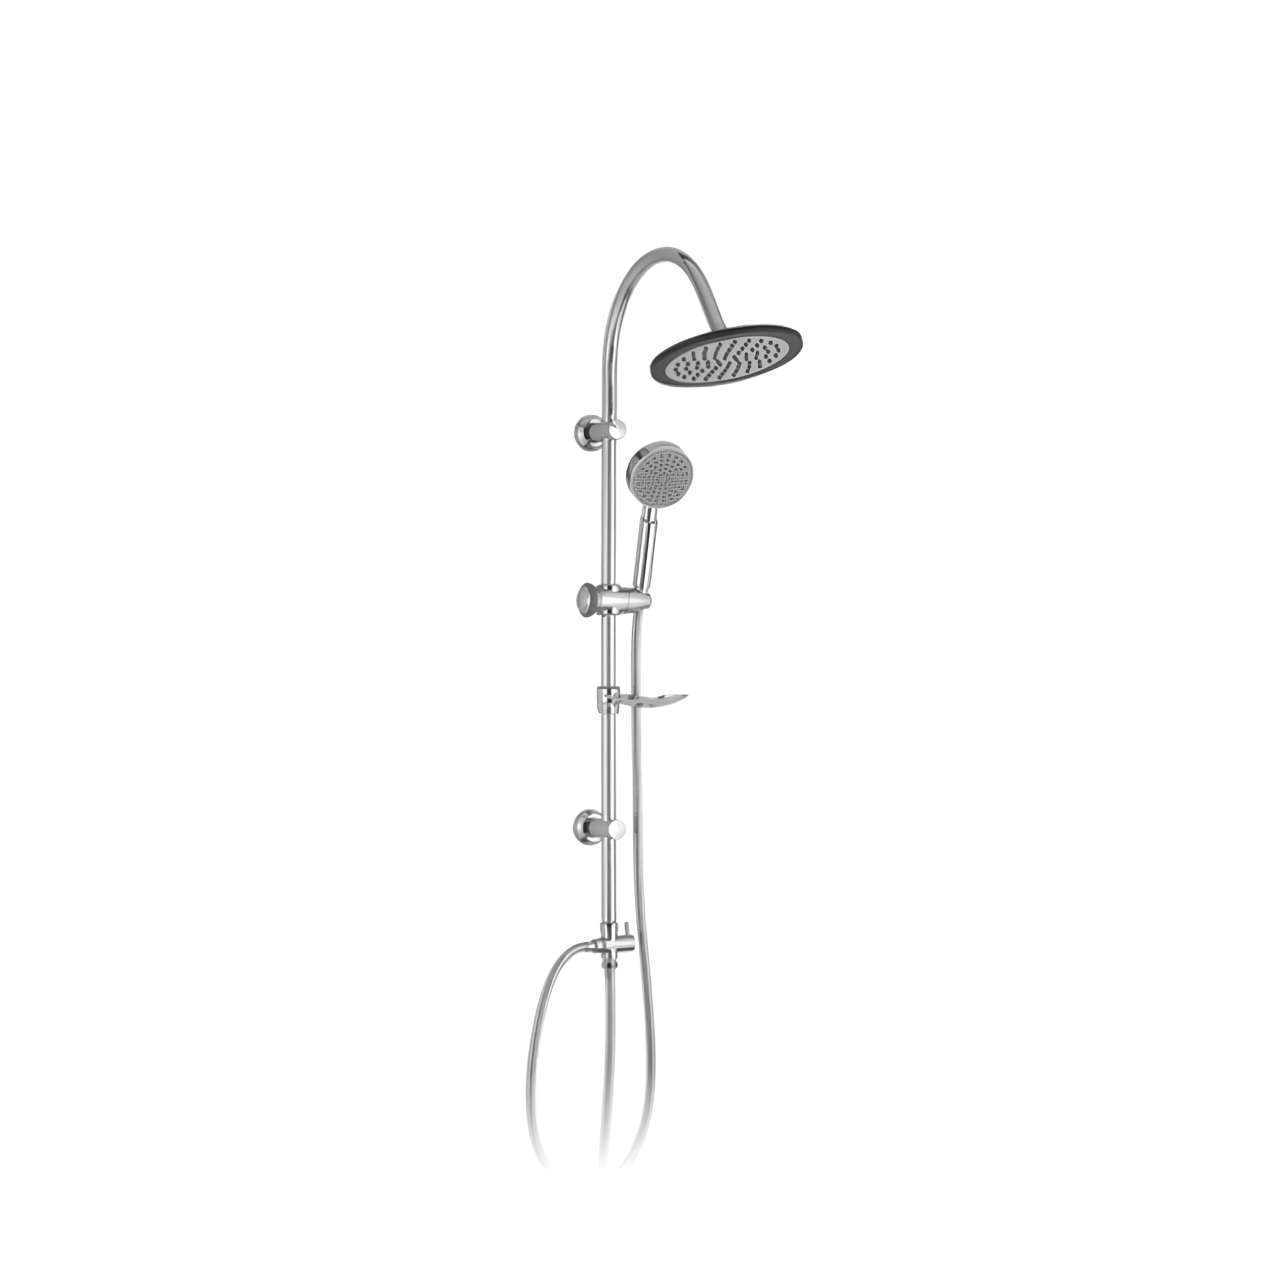 L716C Round Rainfall Shower Head and Handheld Showerhead Combo Shower System with Slide Bar Shower Set